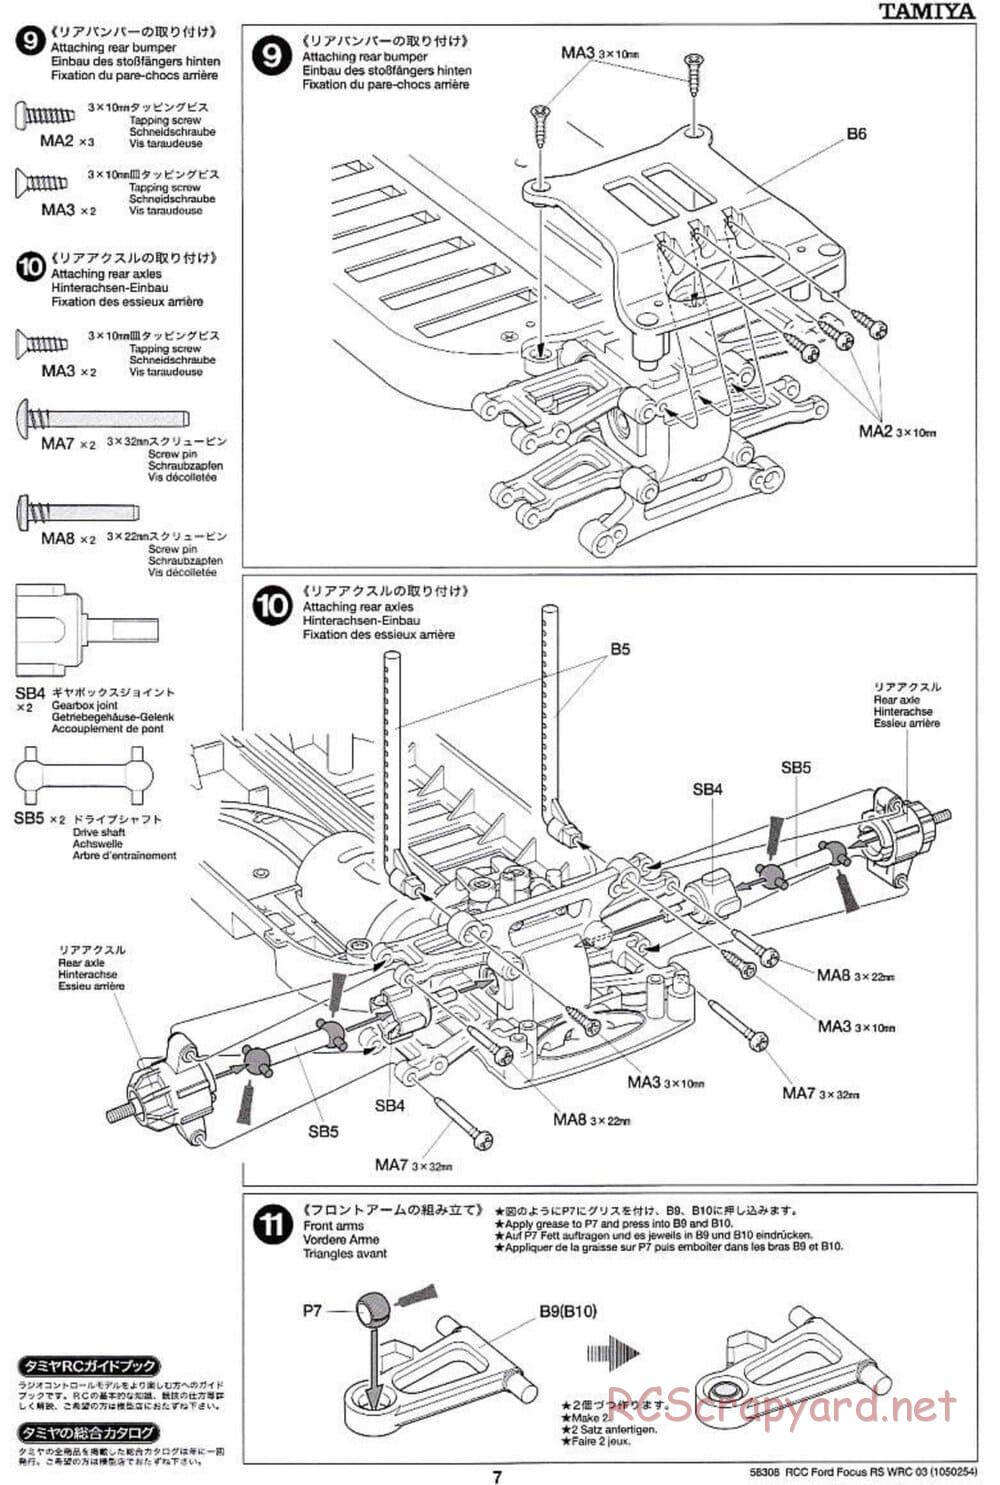 Tamiya - Ford Focus RS WRC 03 - TT-01 Chassis - Manual - Page 7